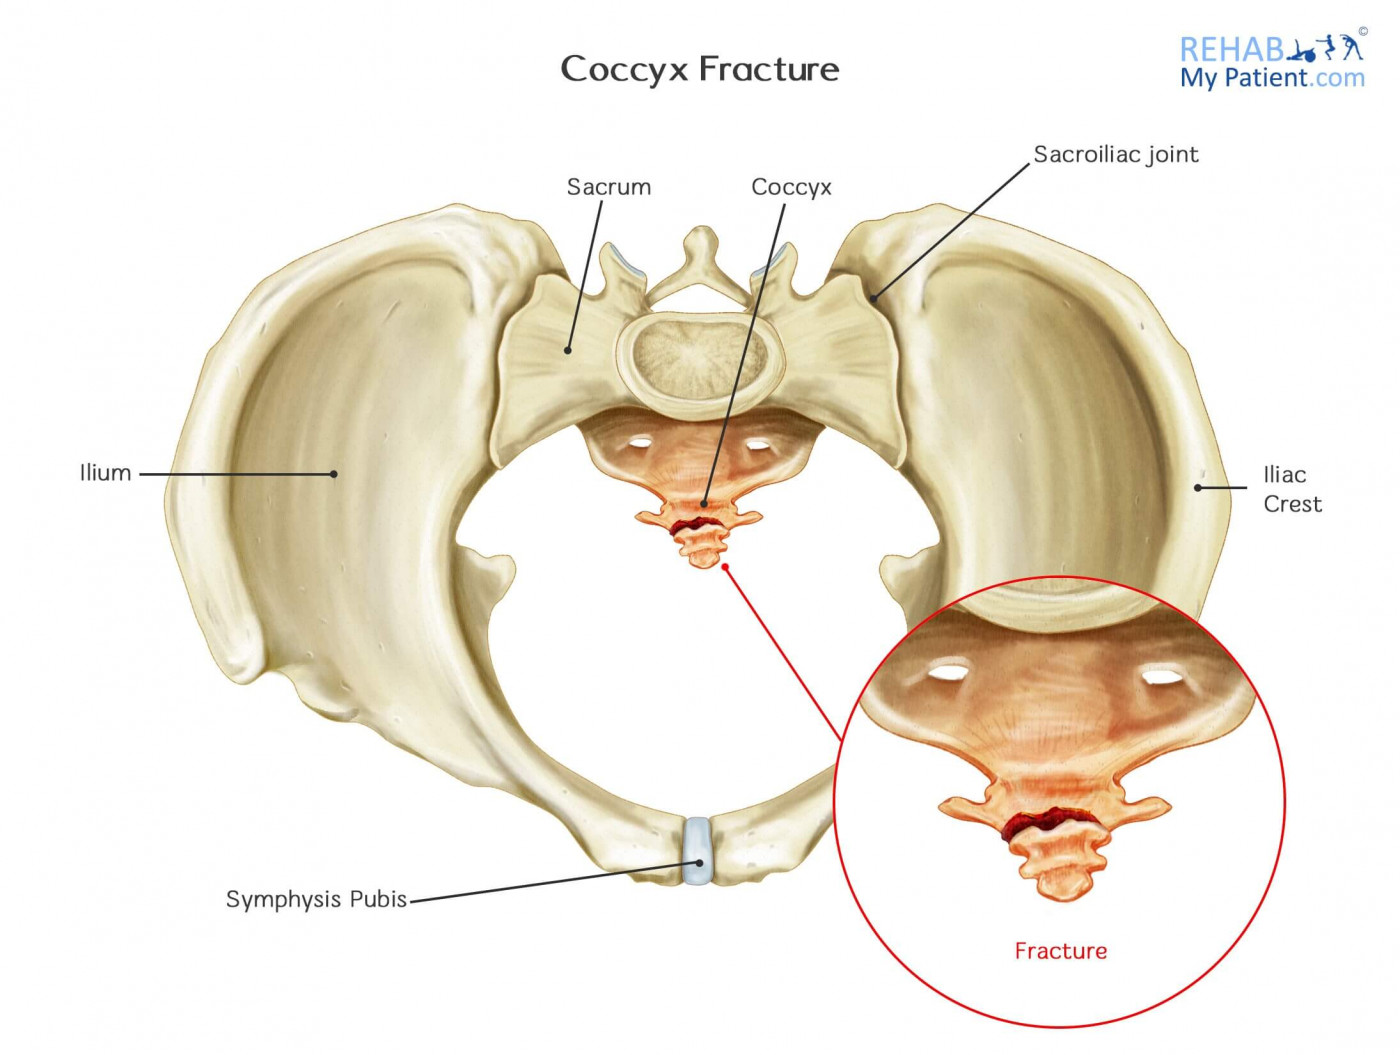 Tailbone Injury (Coccyx Injury): symptoms, causes, risk factors,  prevention, diagnosis, treatment, surgery, sleeping positions